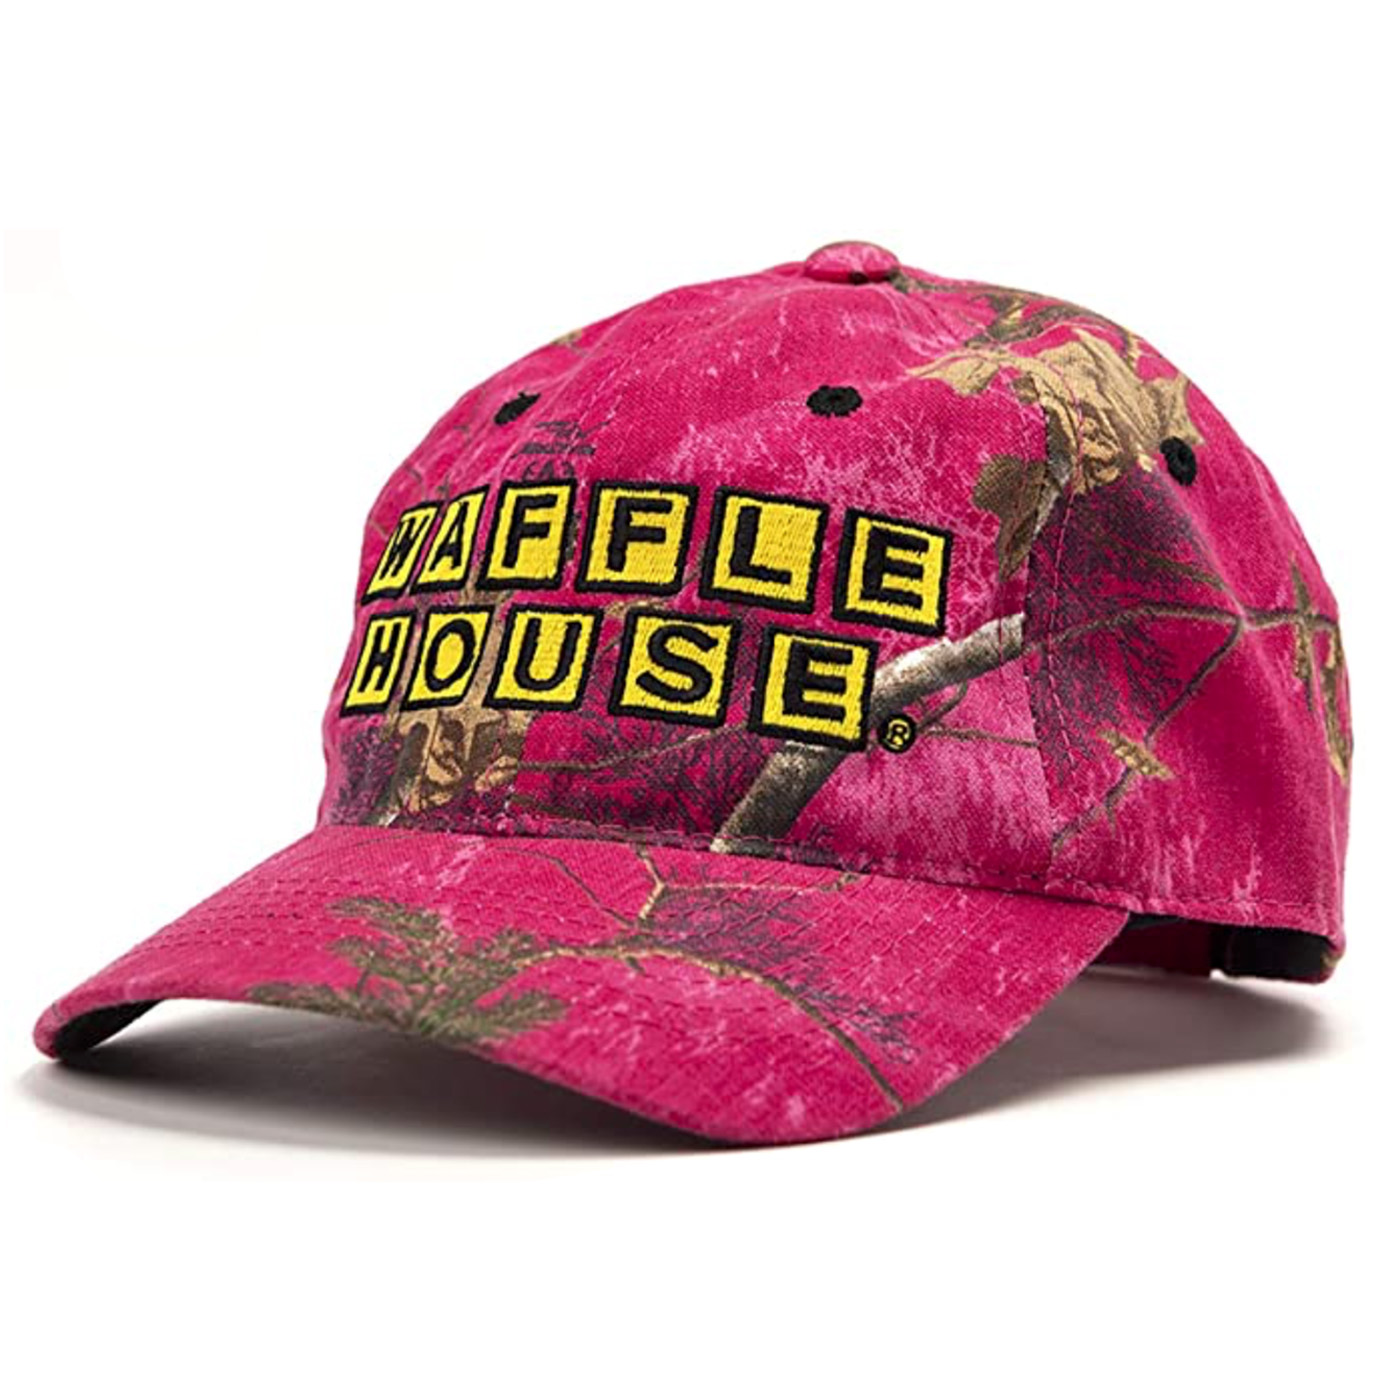 Waffle House Realtree Xtra Colors Camo Hat Pink XL